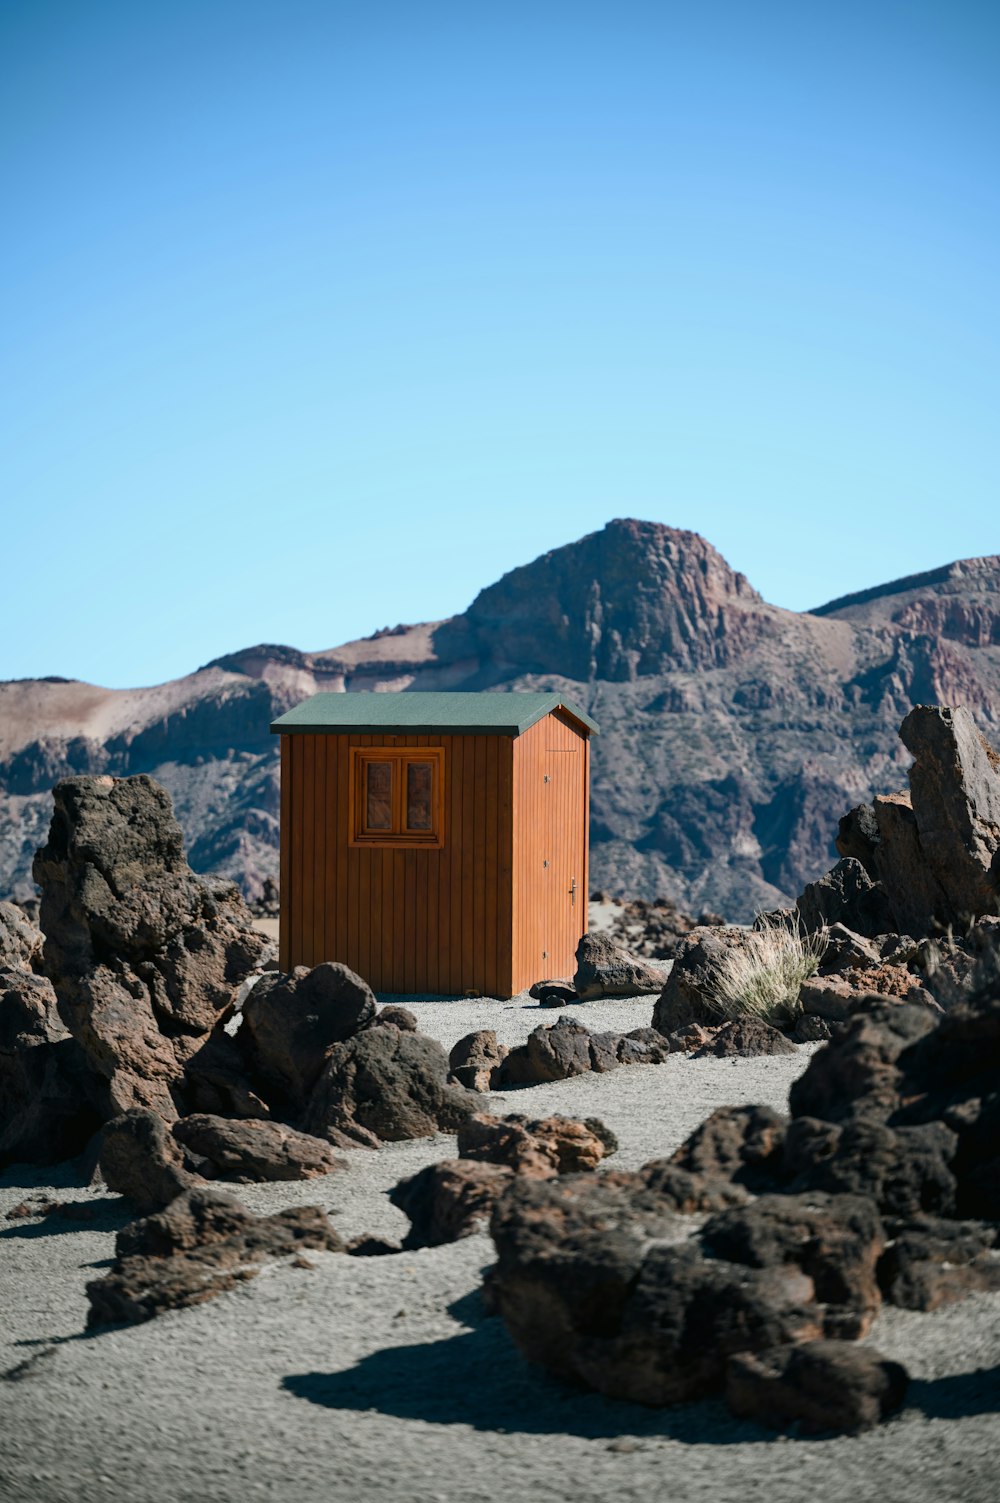 a small outhouse in the middle of a desert